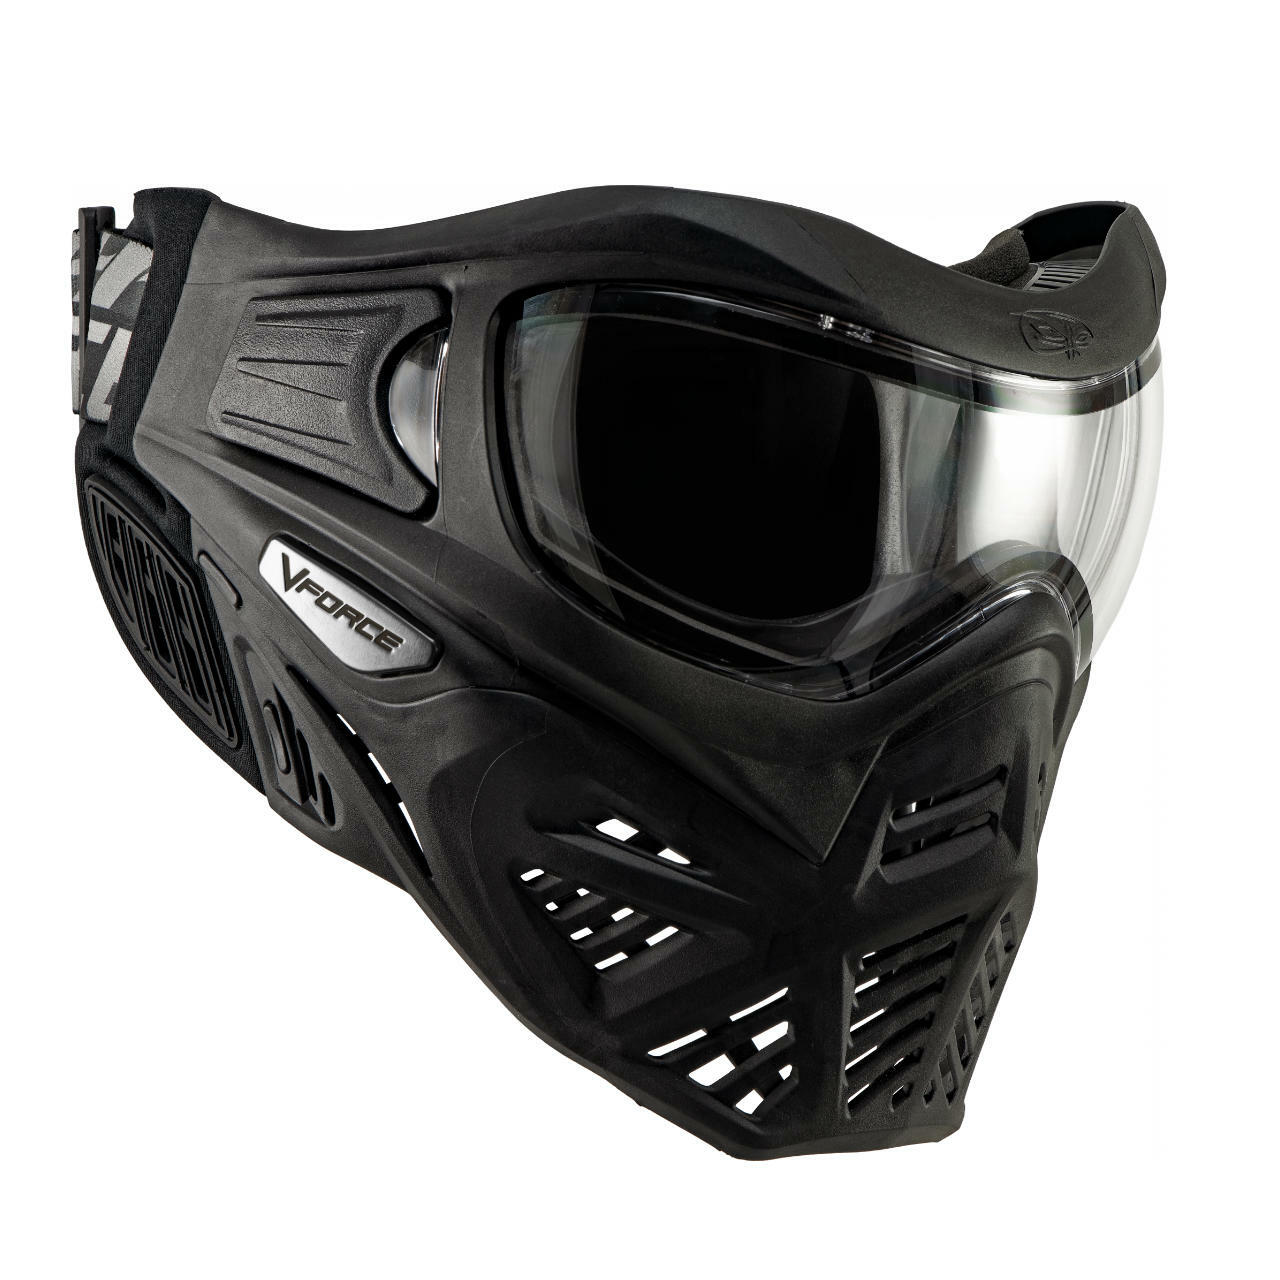 V-Force Grill 2.0 Paintball Goggles, Black